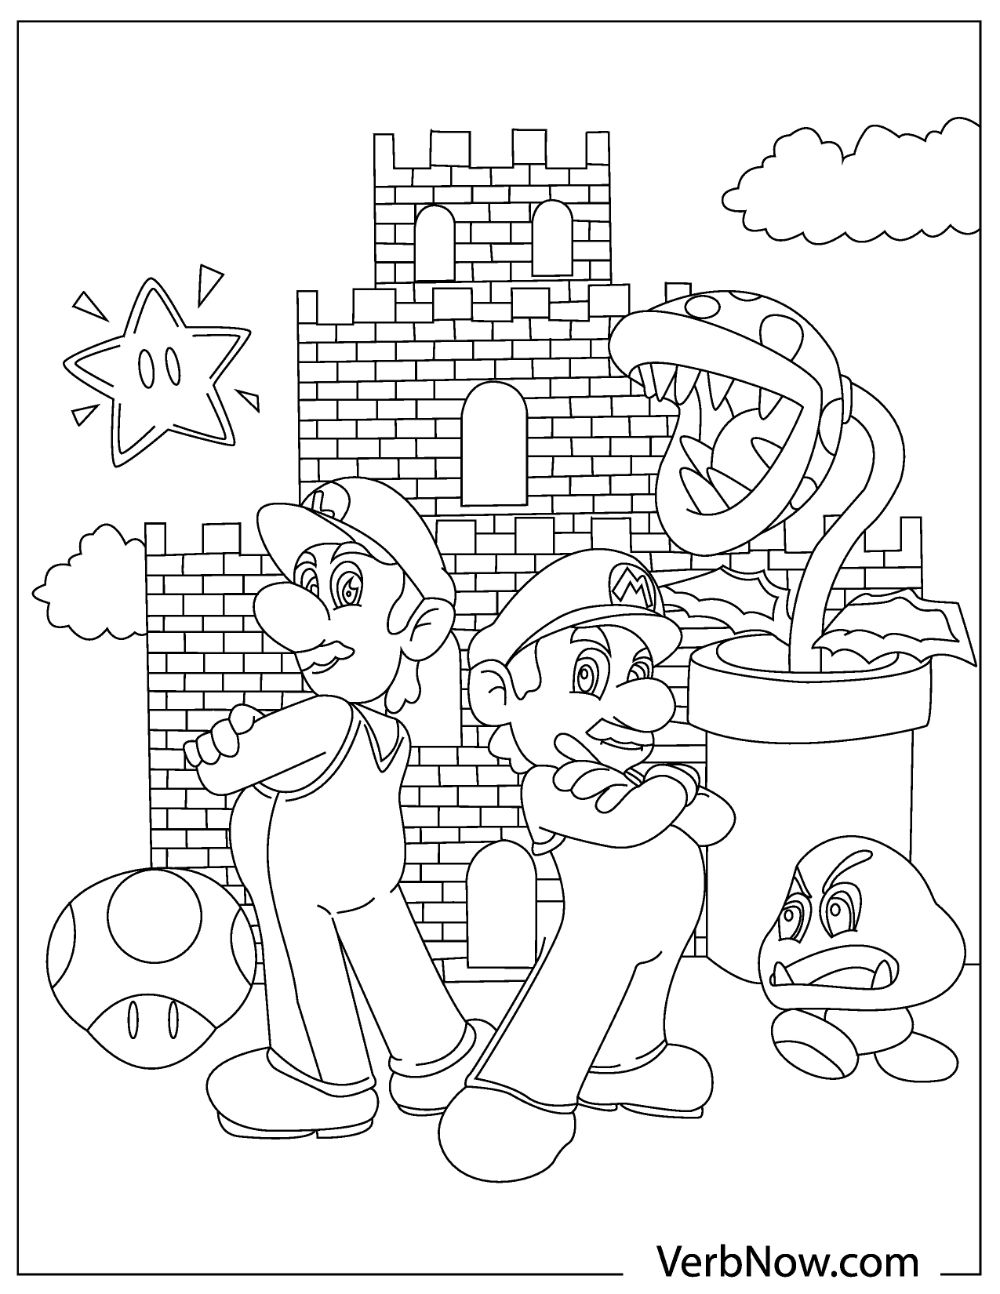 Free mario coloring pages your kids will love our designs